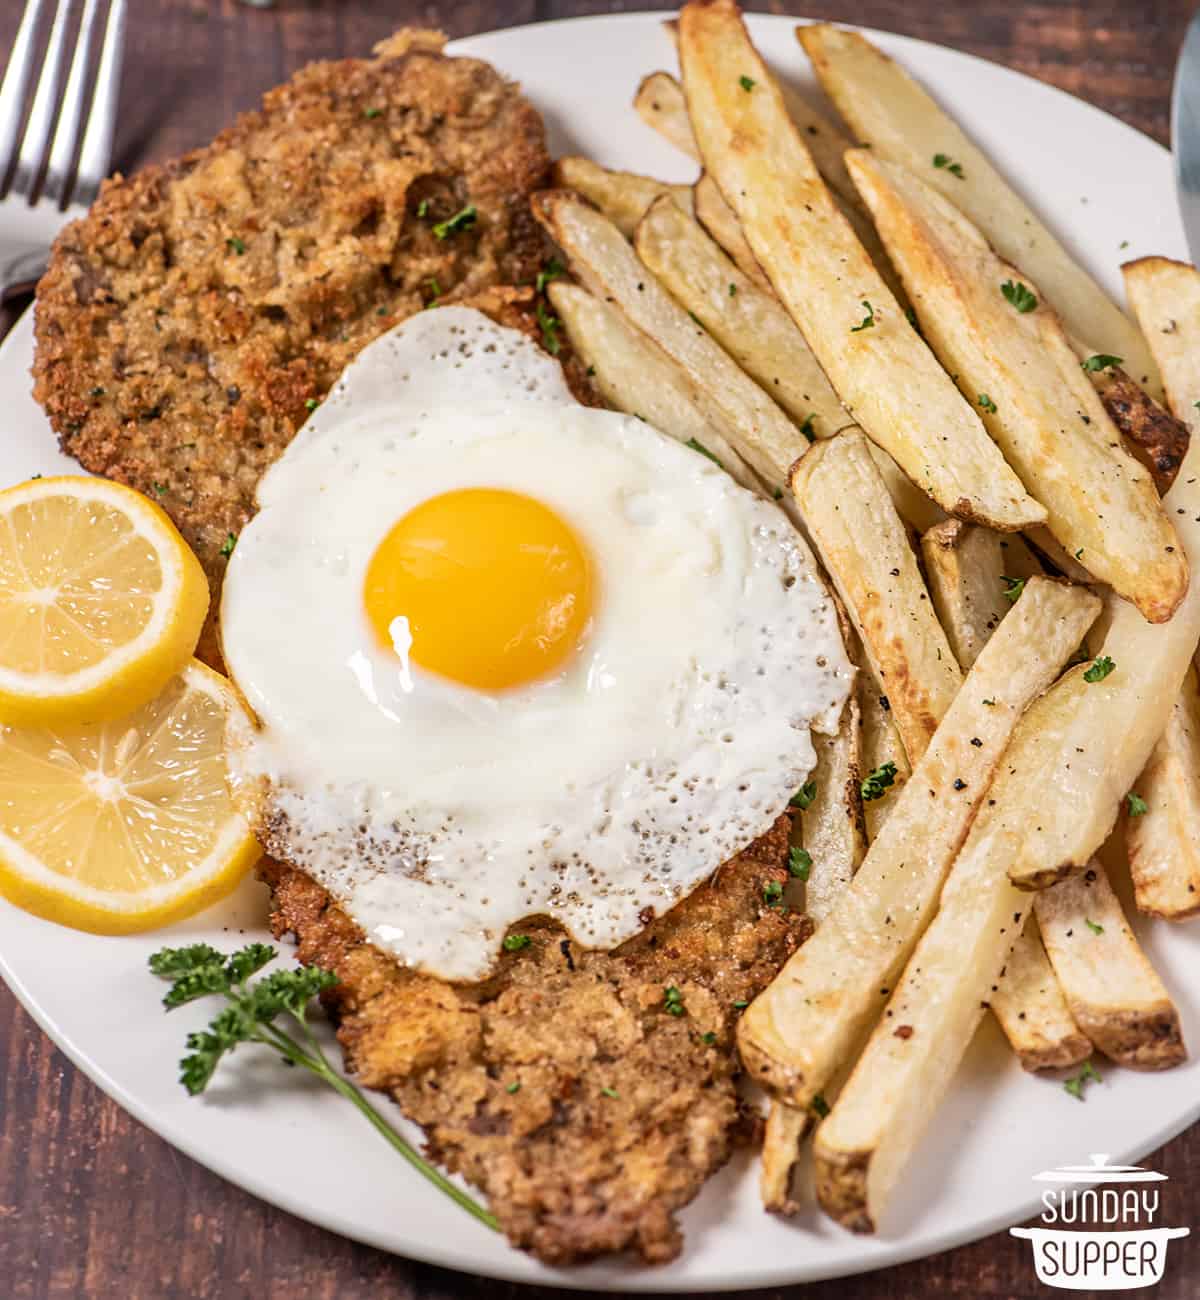 steak milanesa on a plate with fries, lemon slices, and a fried egg